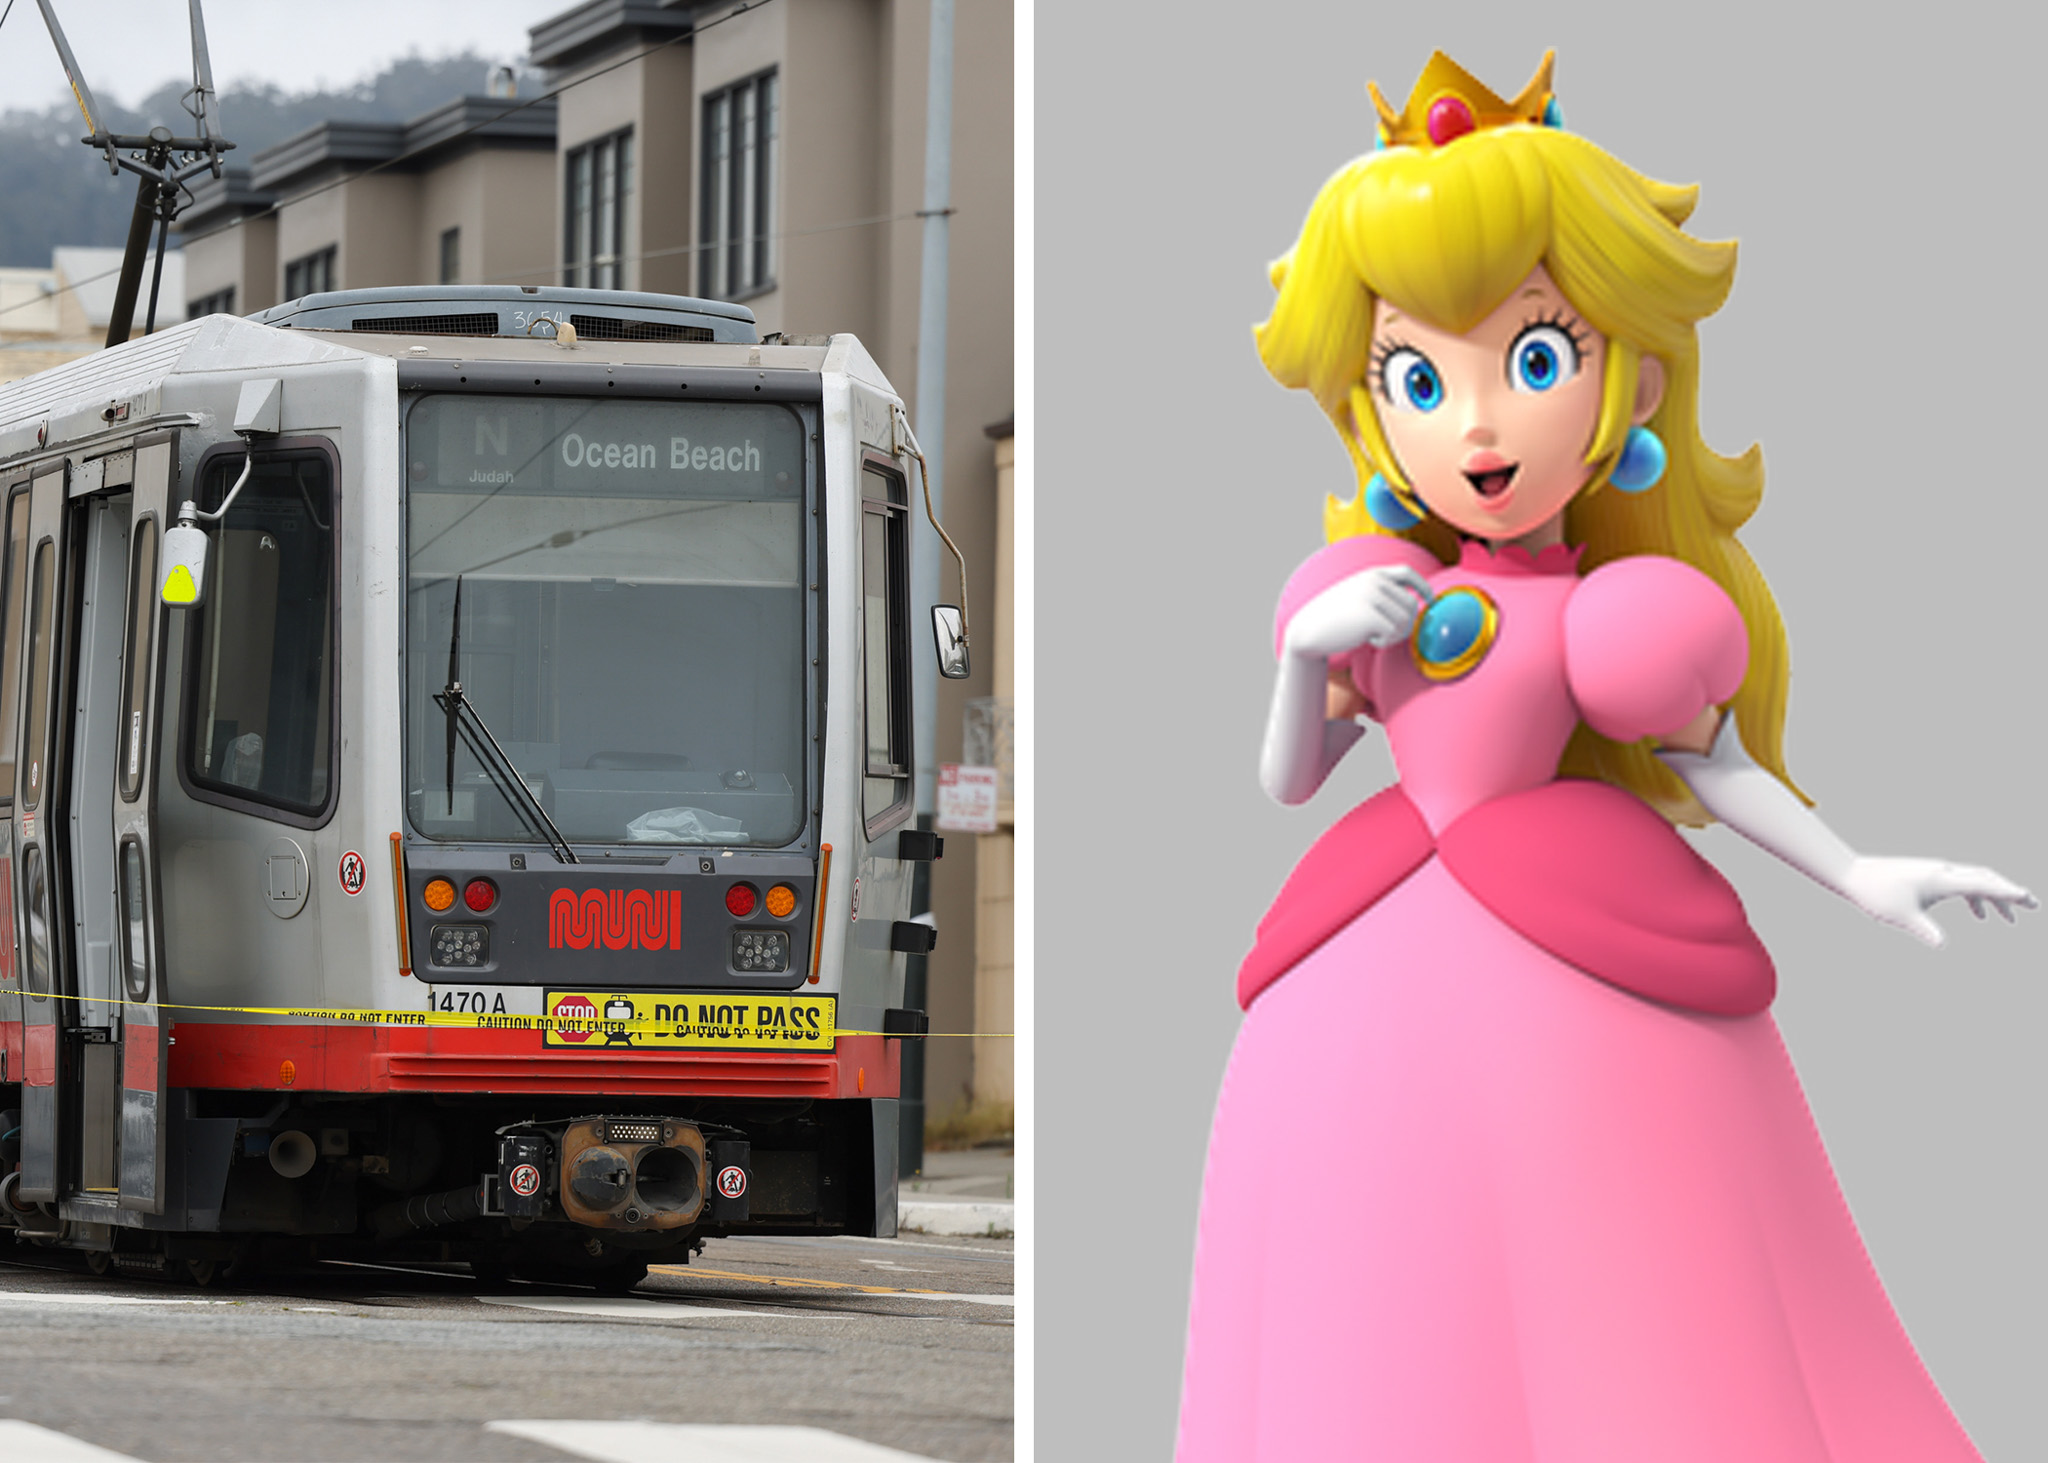 The image is split into two halves: left shows a San Francisco Muni tram labeled &quot;Ocean Beach,&quot; and right shows Princess Peach from Mario games in a pink dress.